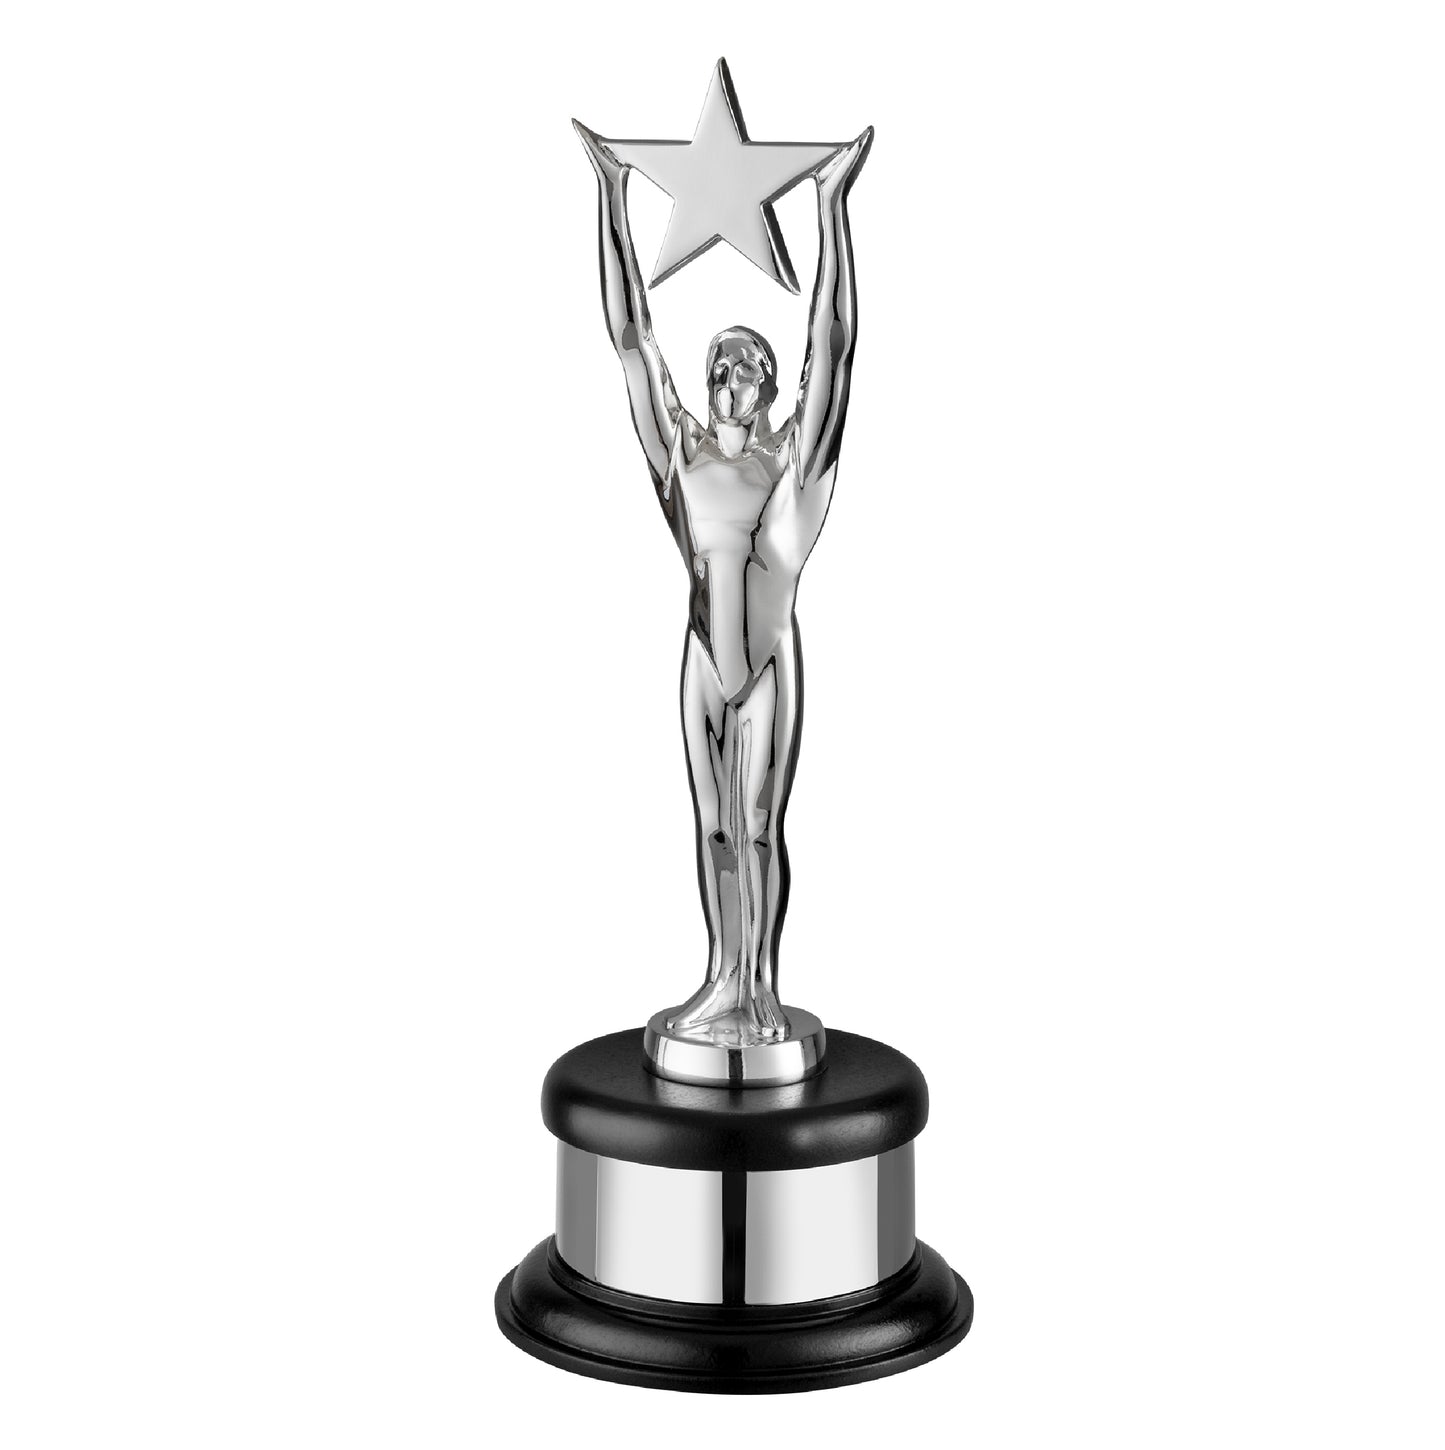 Classic Solid Metal Figure Trophy - Heavy Silver Plated Figurine - Star